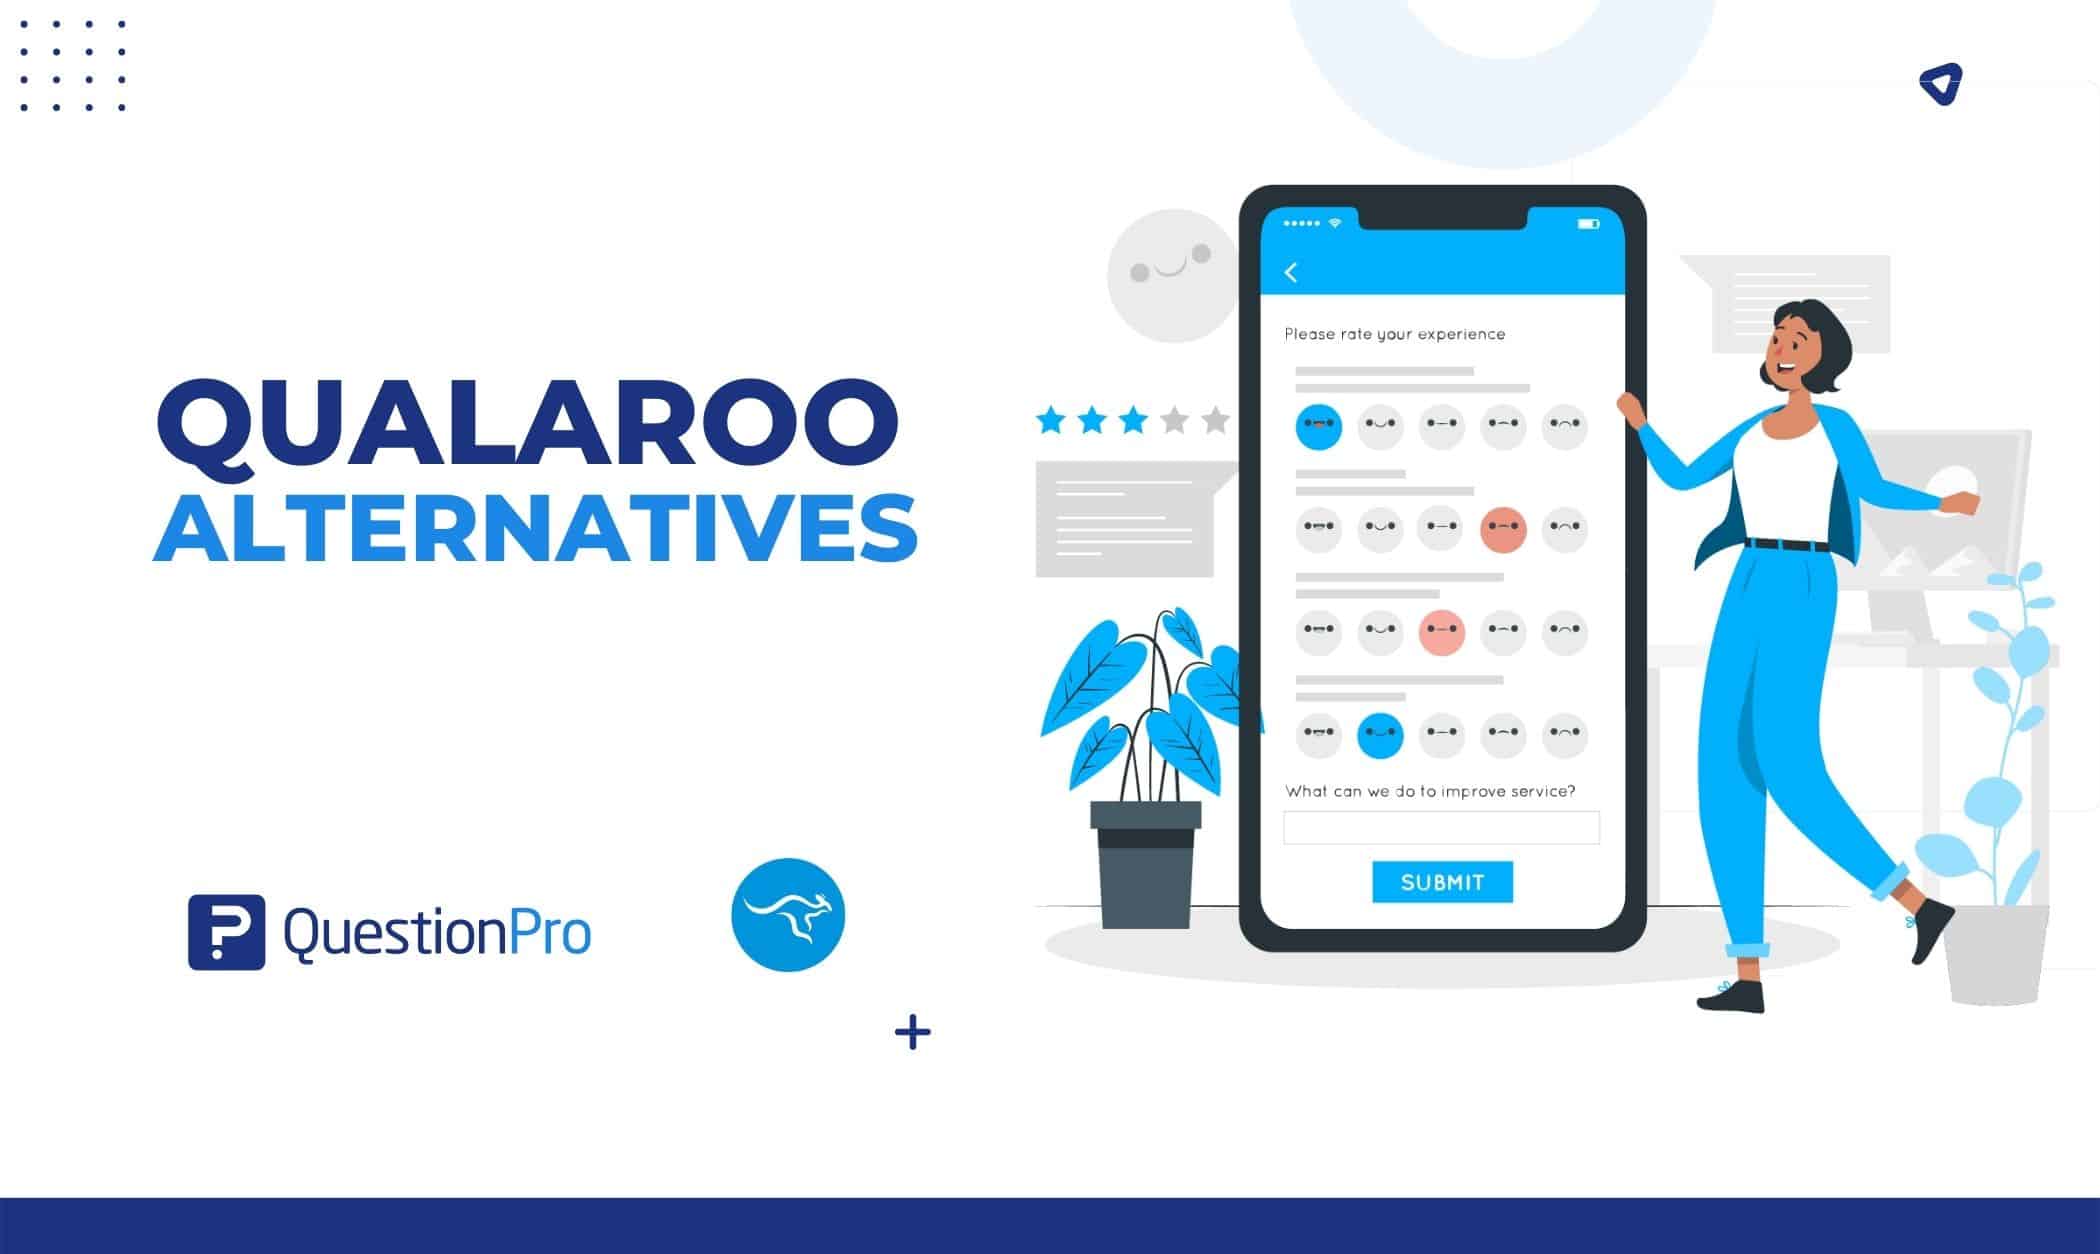 Find the best Qualaroo alternative in this article. Here's the Top 11 Best Qualaroo alternatives to see which one best suits your needs.